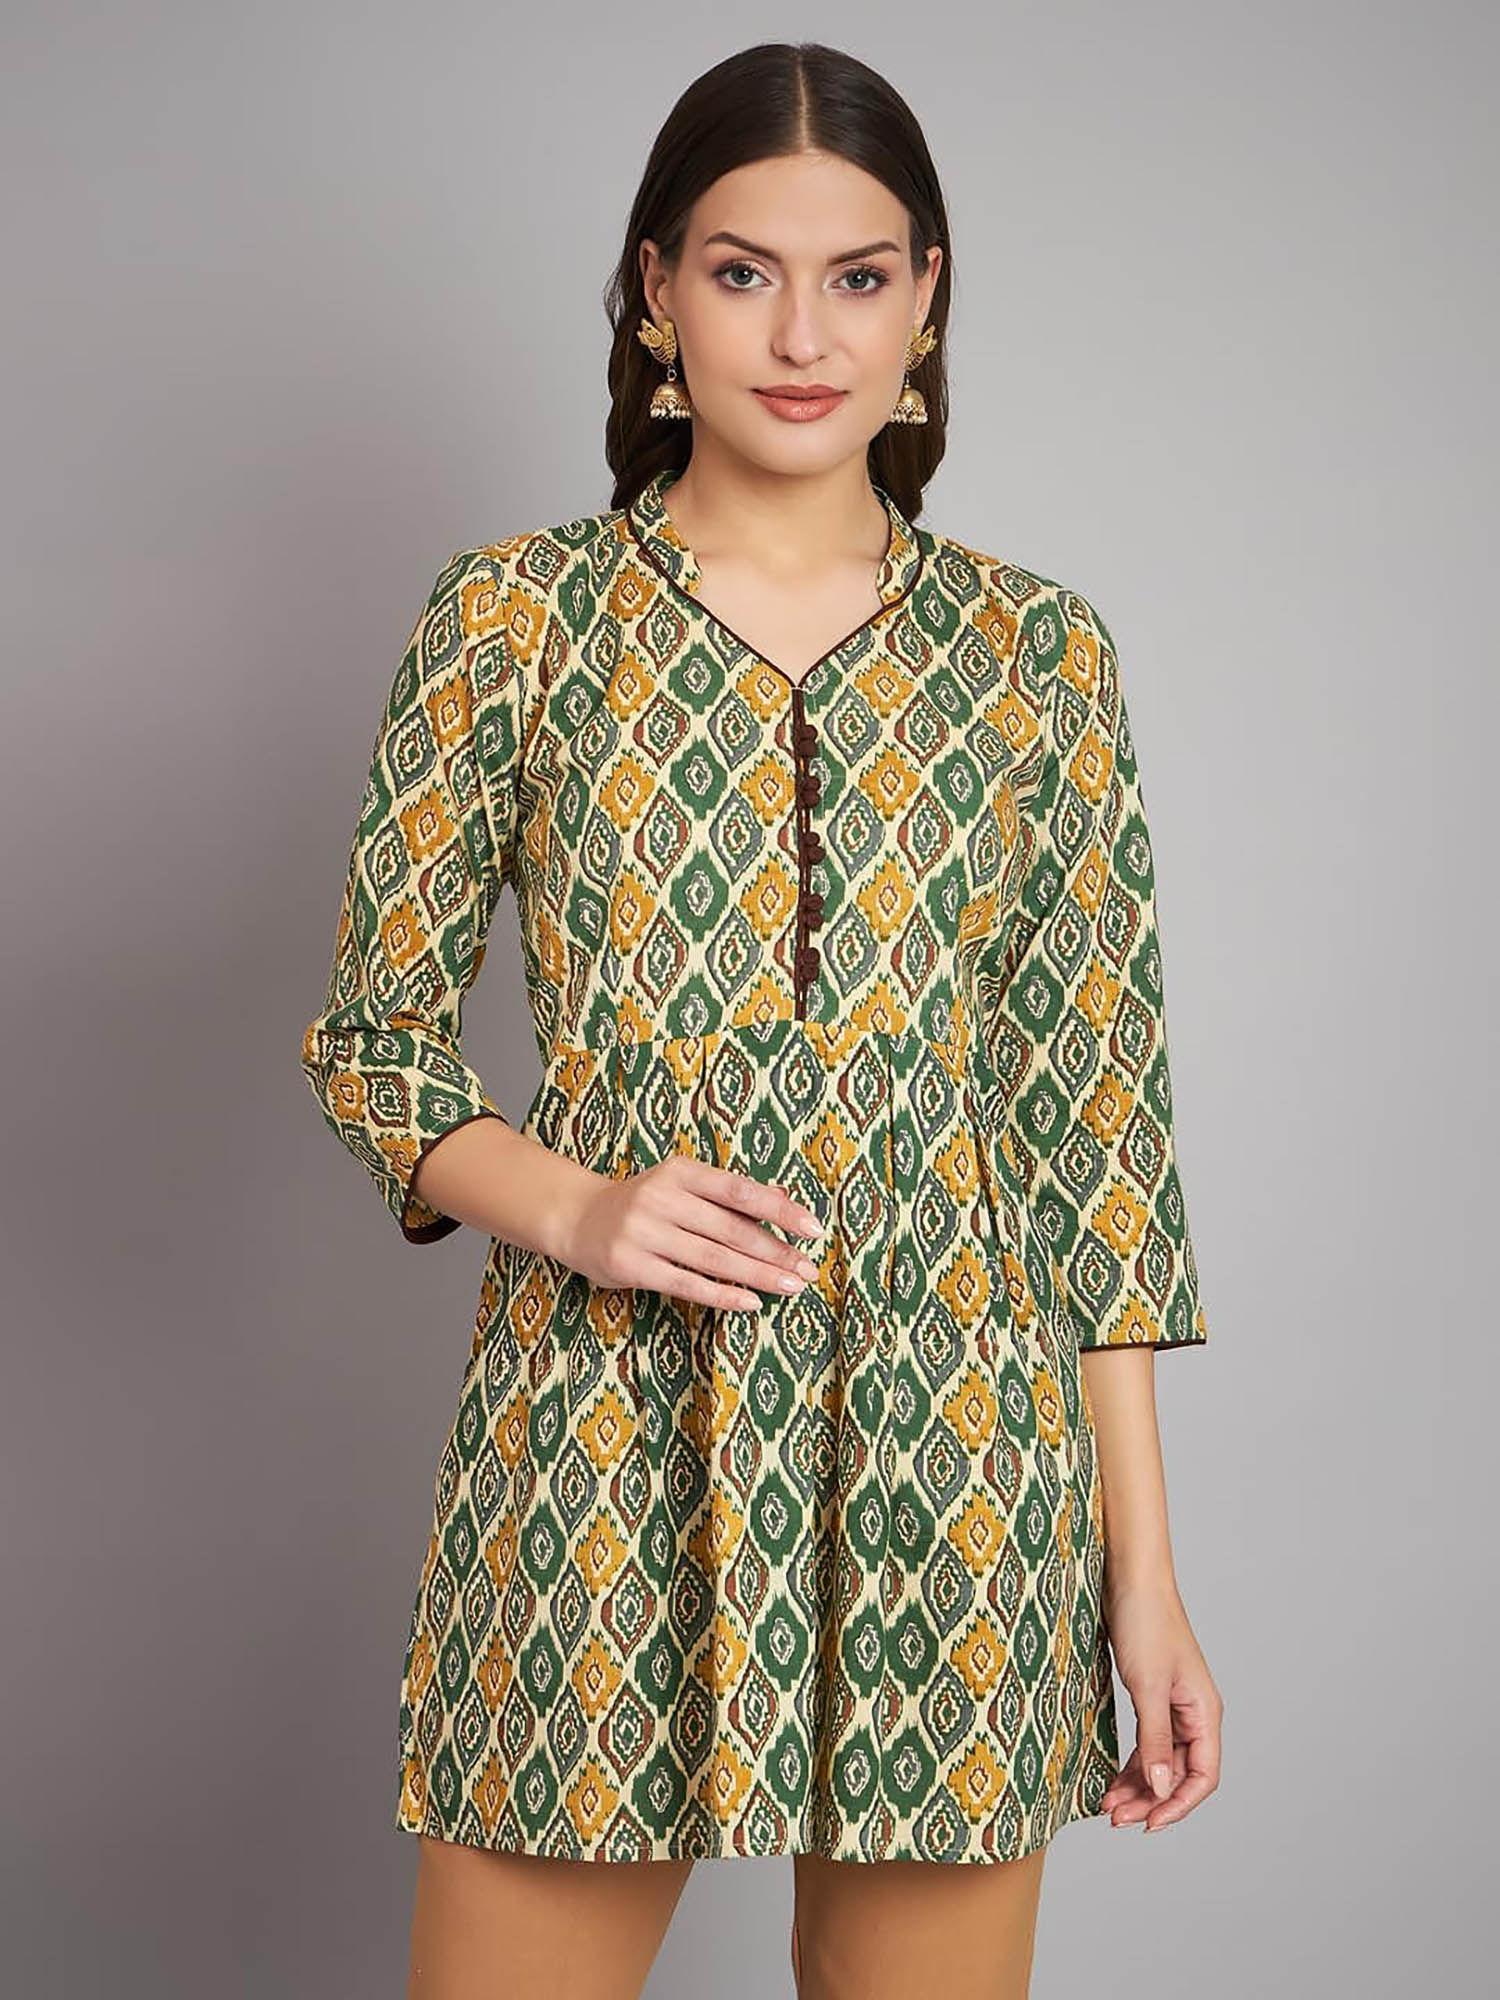 cotton green ikat printed short kurti with silver shimmer button embellishment